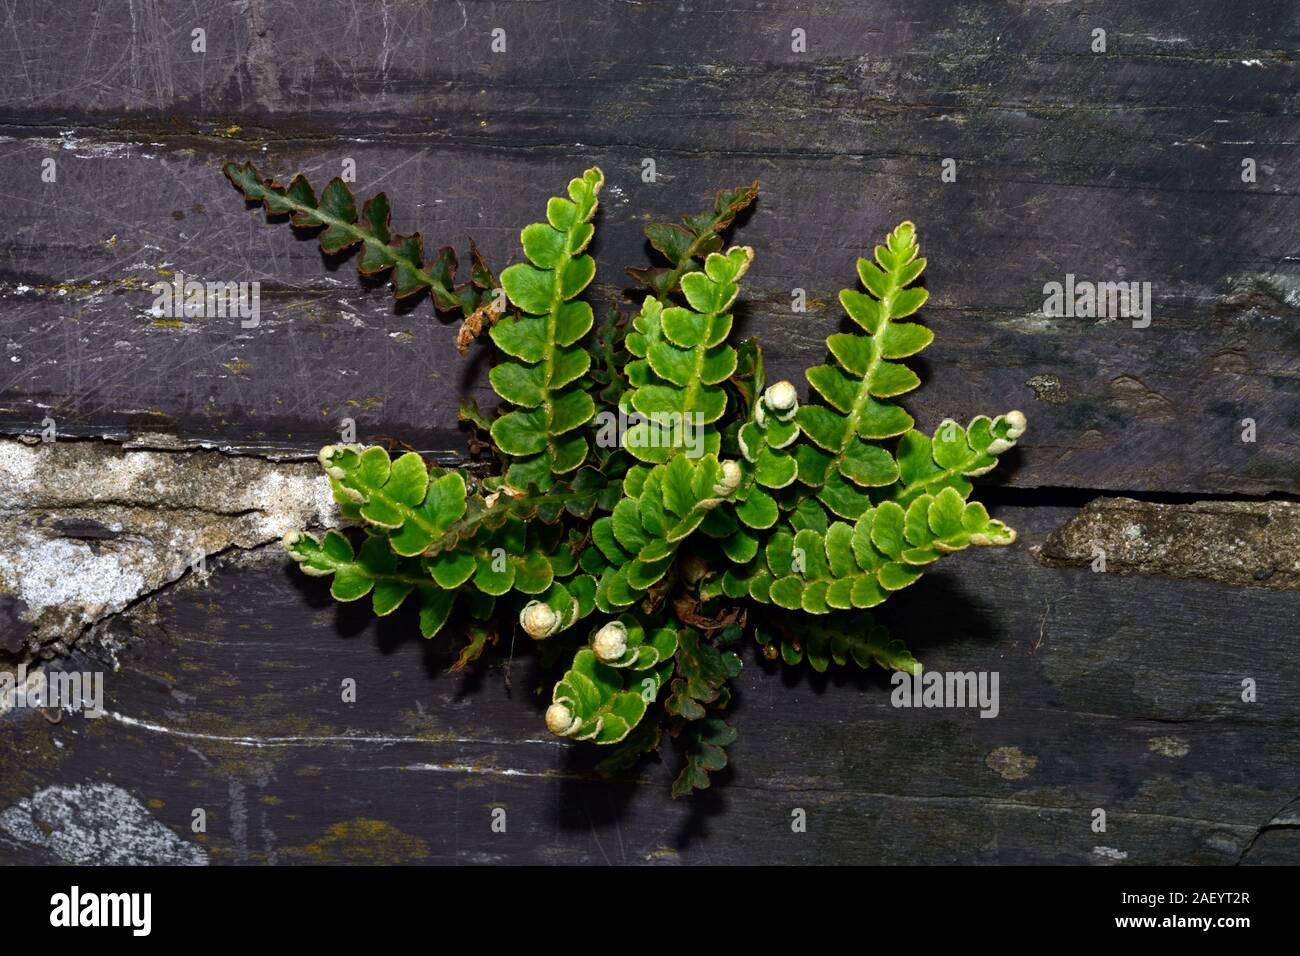 Ceterach officinarum (rustyback) is a fern found in Western and Central Europe including the Mediterranean region in fissures in carbonate rocks. Stock Photo